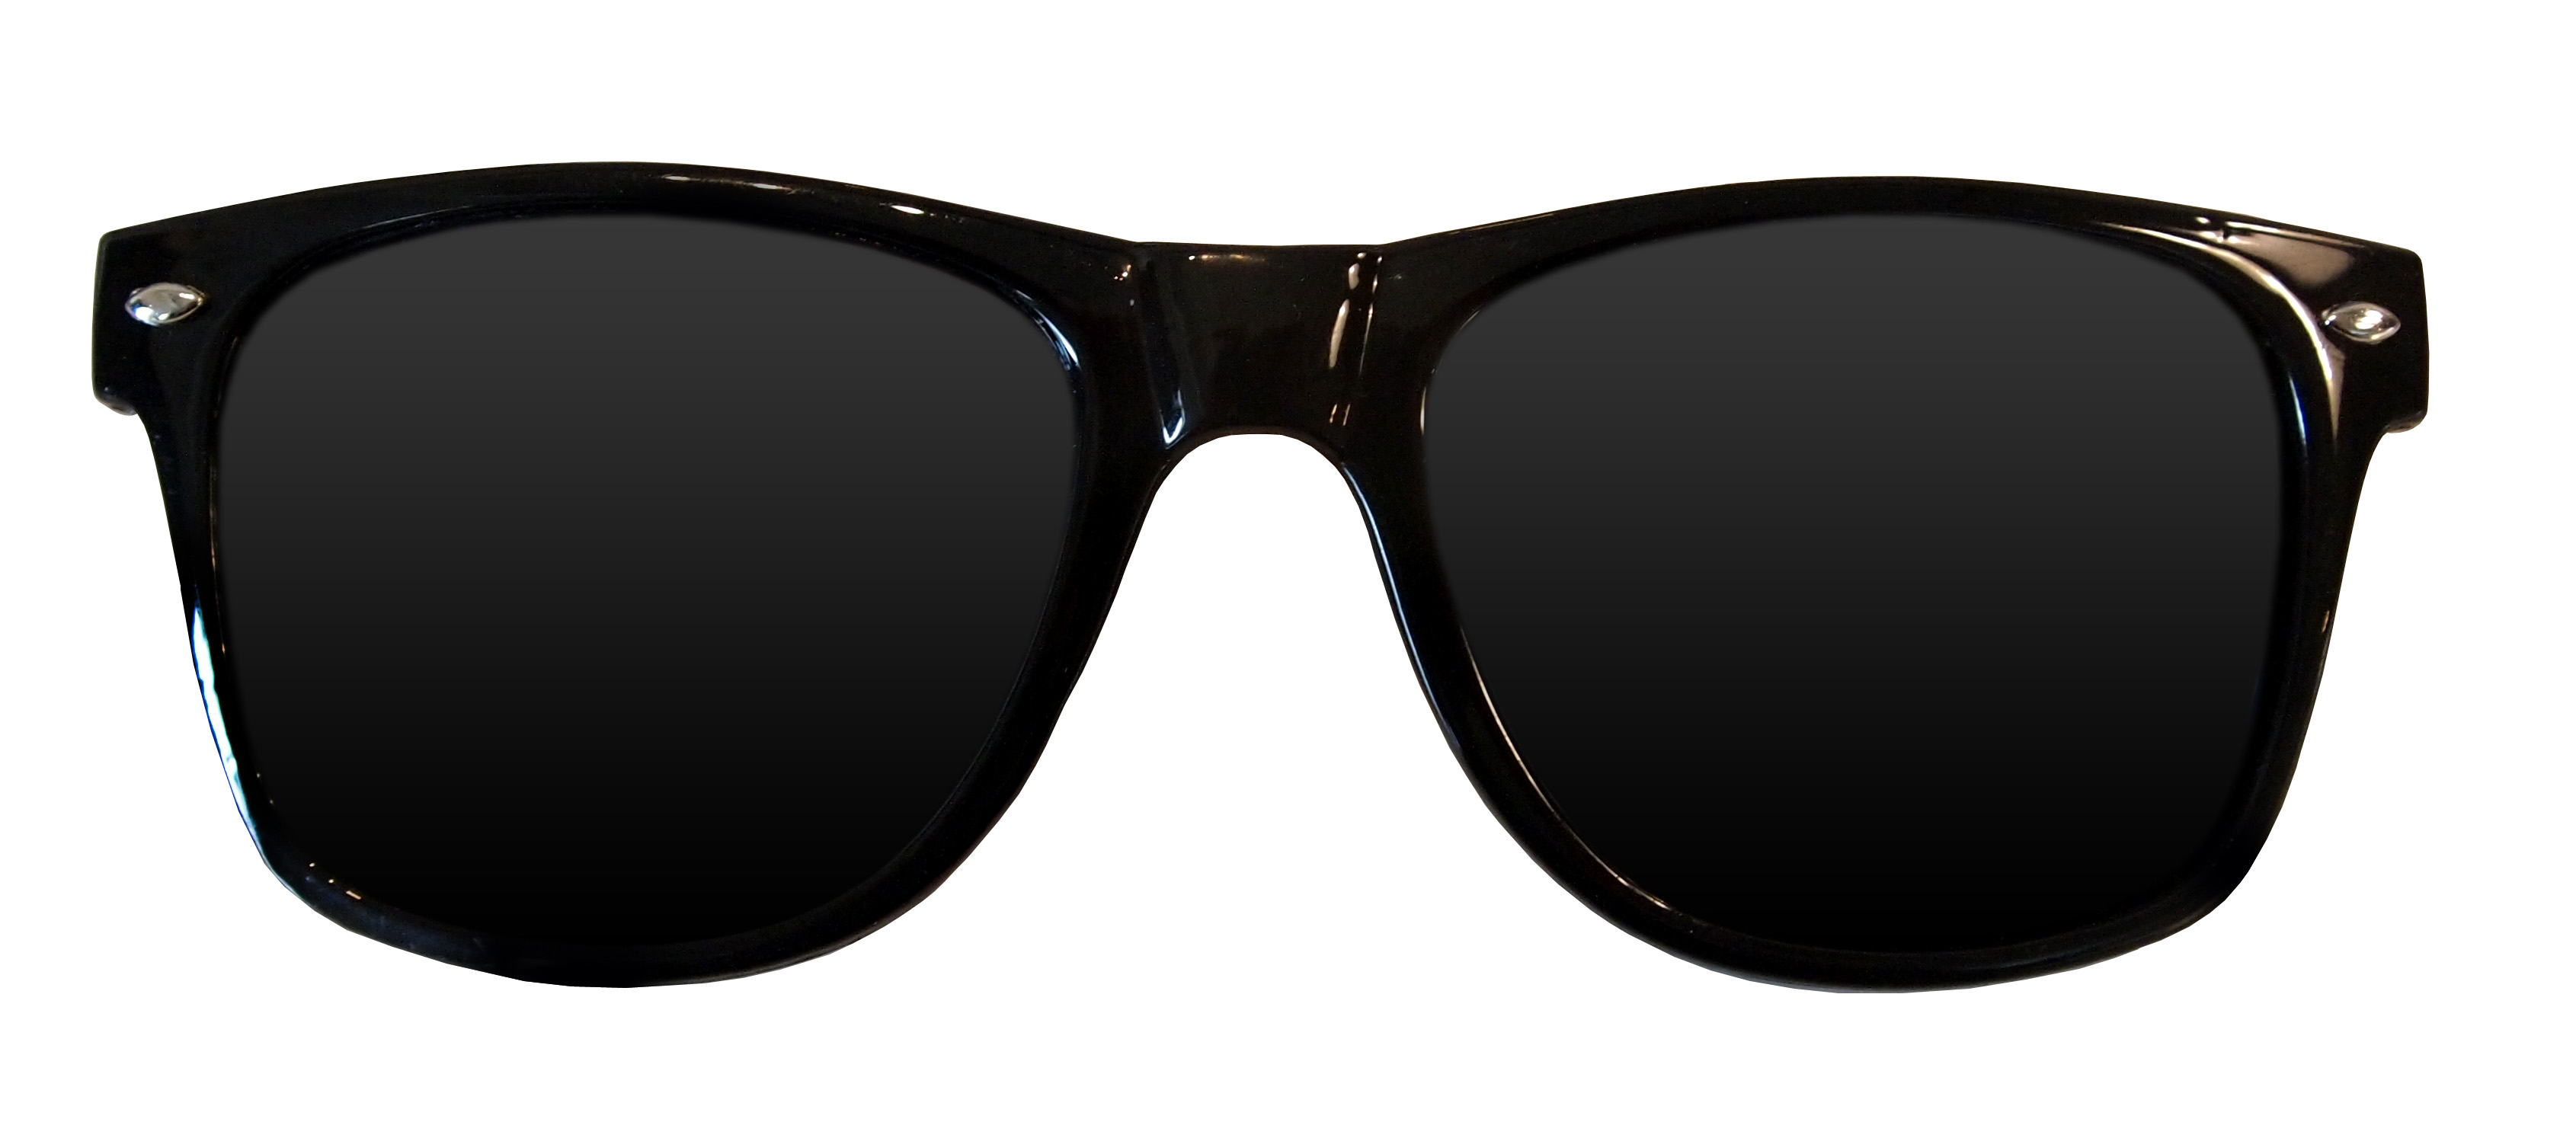 Free Aviator Shades Cliparts, Download Free Aviator Shades Cliparts png